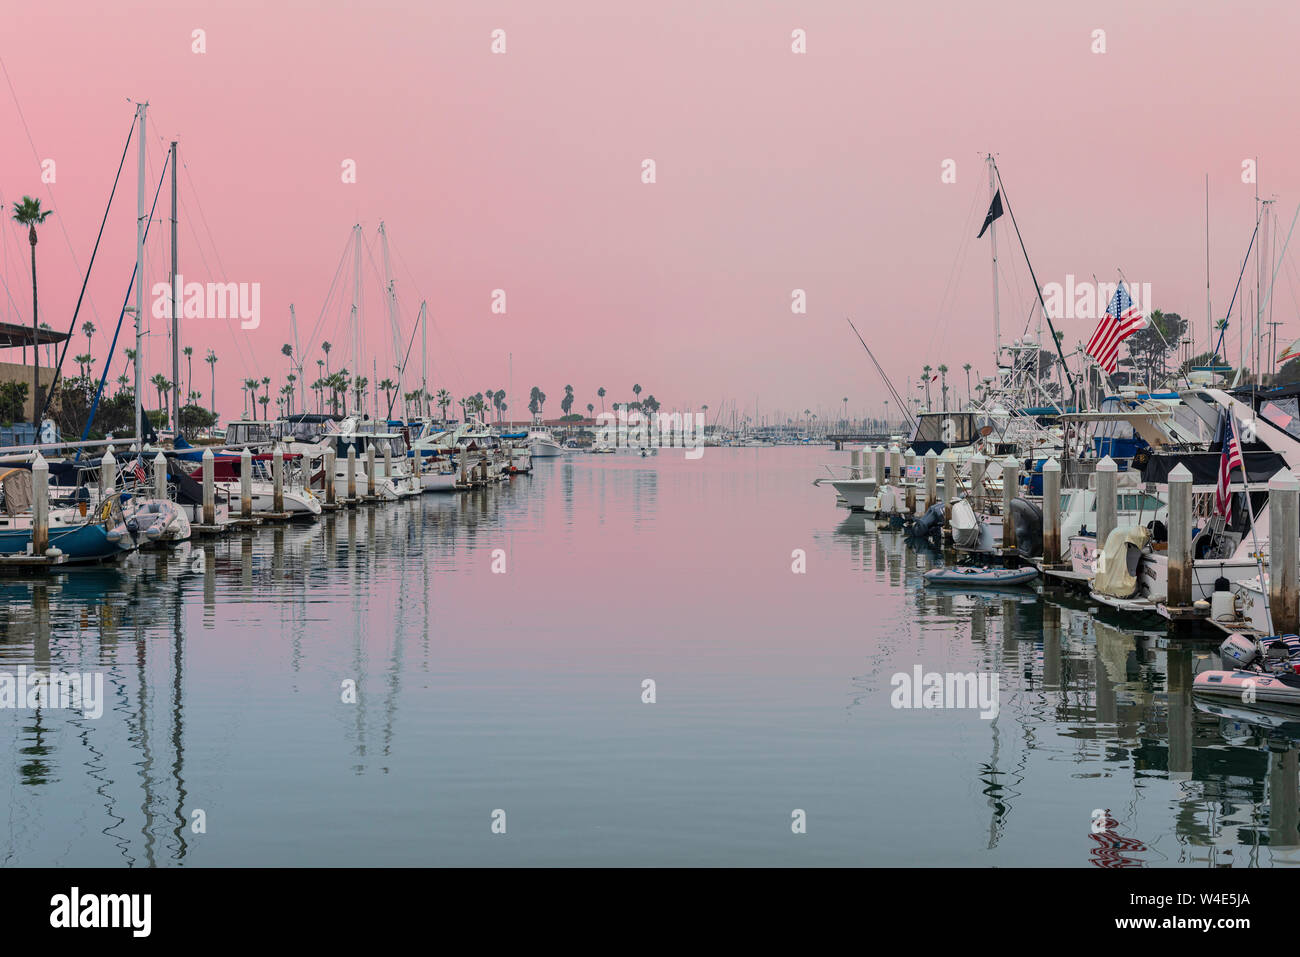 Pale pink sunset over harbor with boats docked. Stock Photo